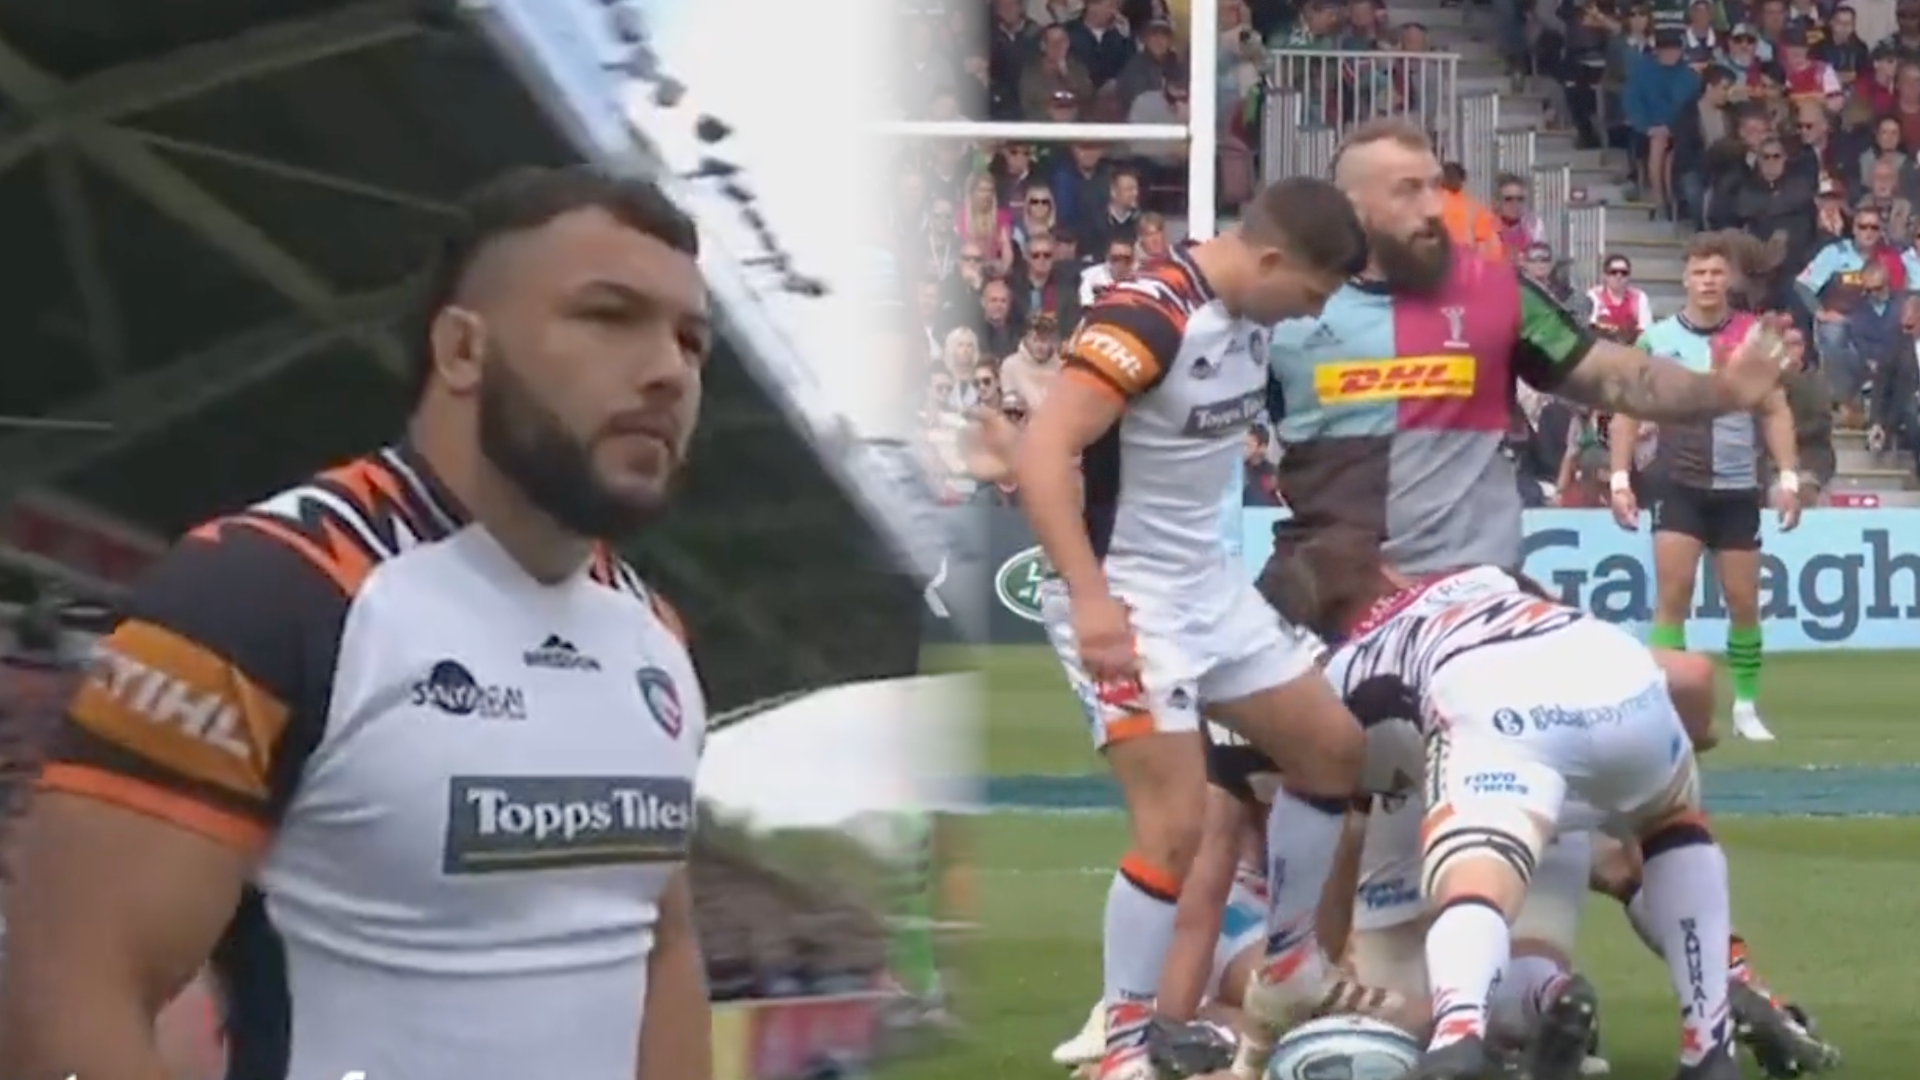 The moment Genge replaced Marler as the Grand Master of gamesmanship